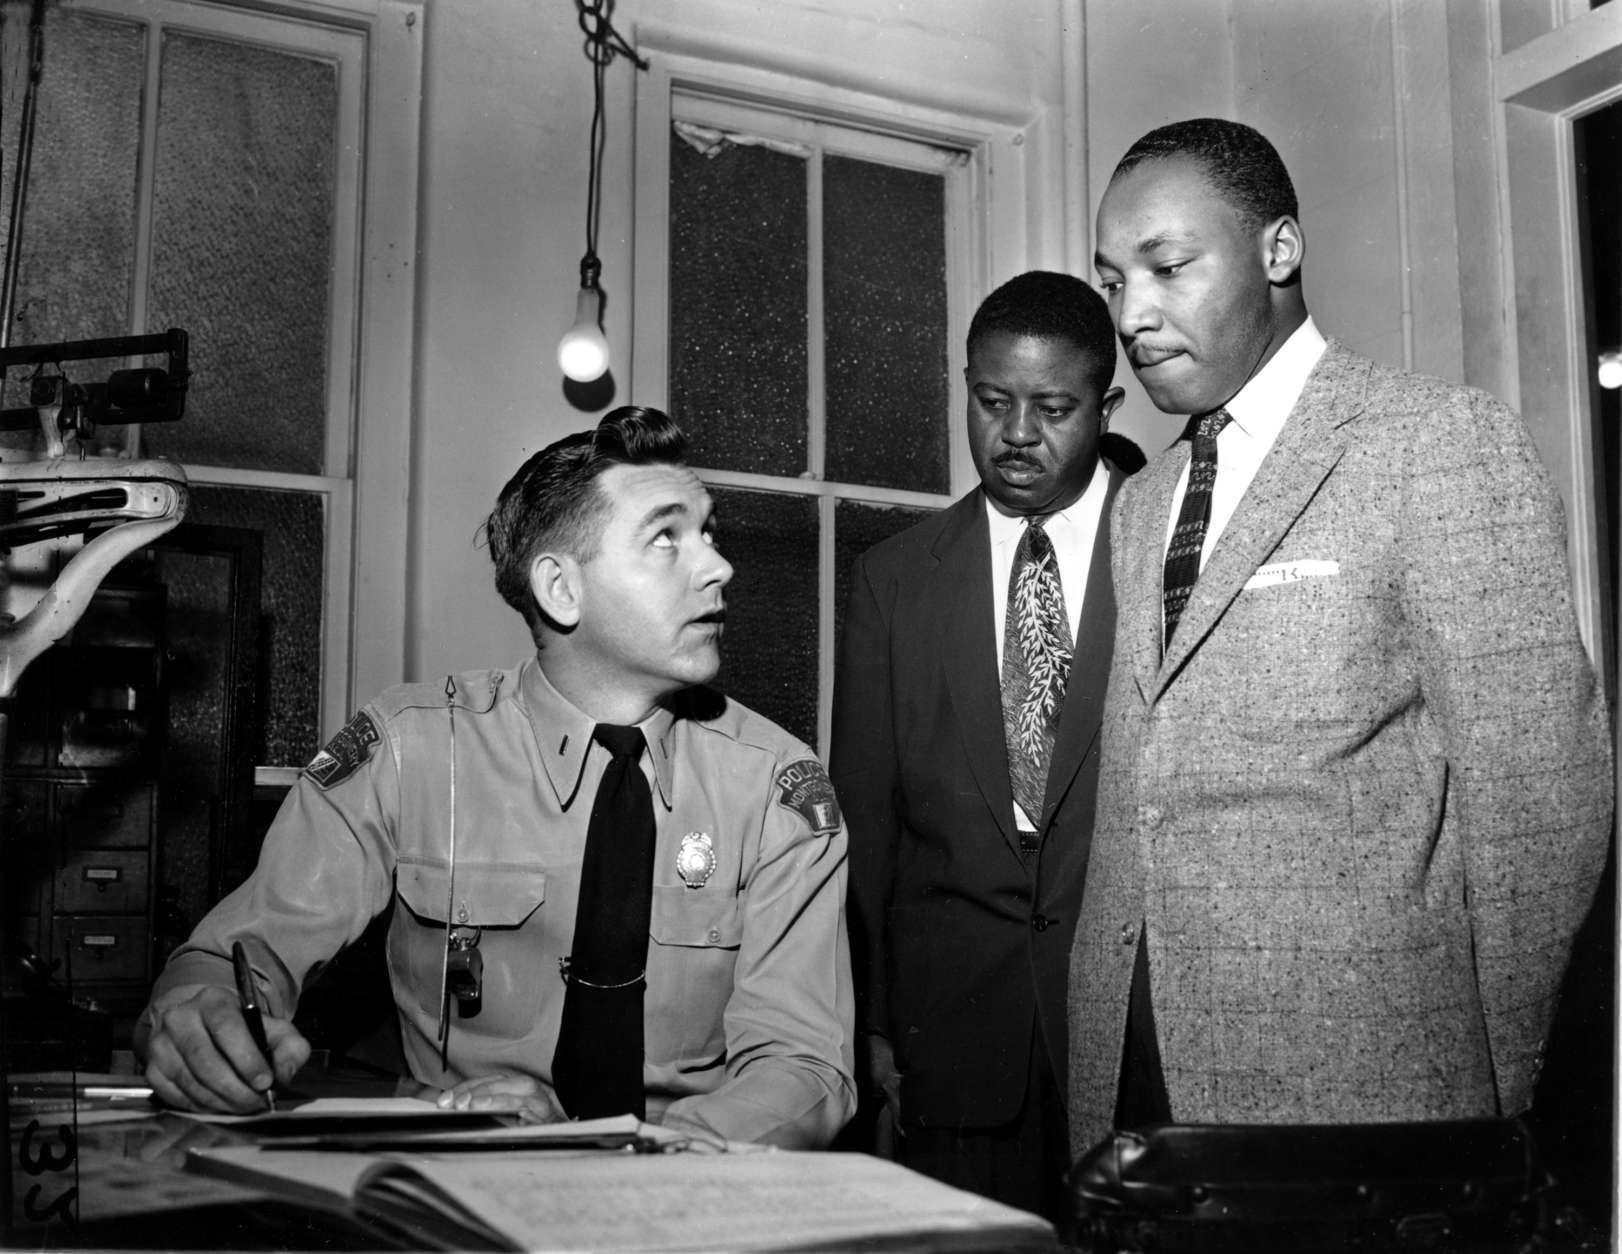 The Rev. Martin Luther King Jr., right, accompanied by Rev. Ralph D. Abernathy, center, is booked by city police Lt. D.H. Lackey in Montgomery, Ala., on Feb. 23, 1956.  The civil rights leaders are arrested on indictments turned by the Grand Jury in the bus boycott.  (AP Photo/Gene Herrick)